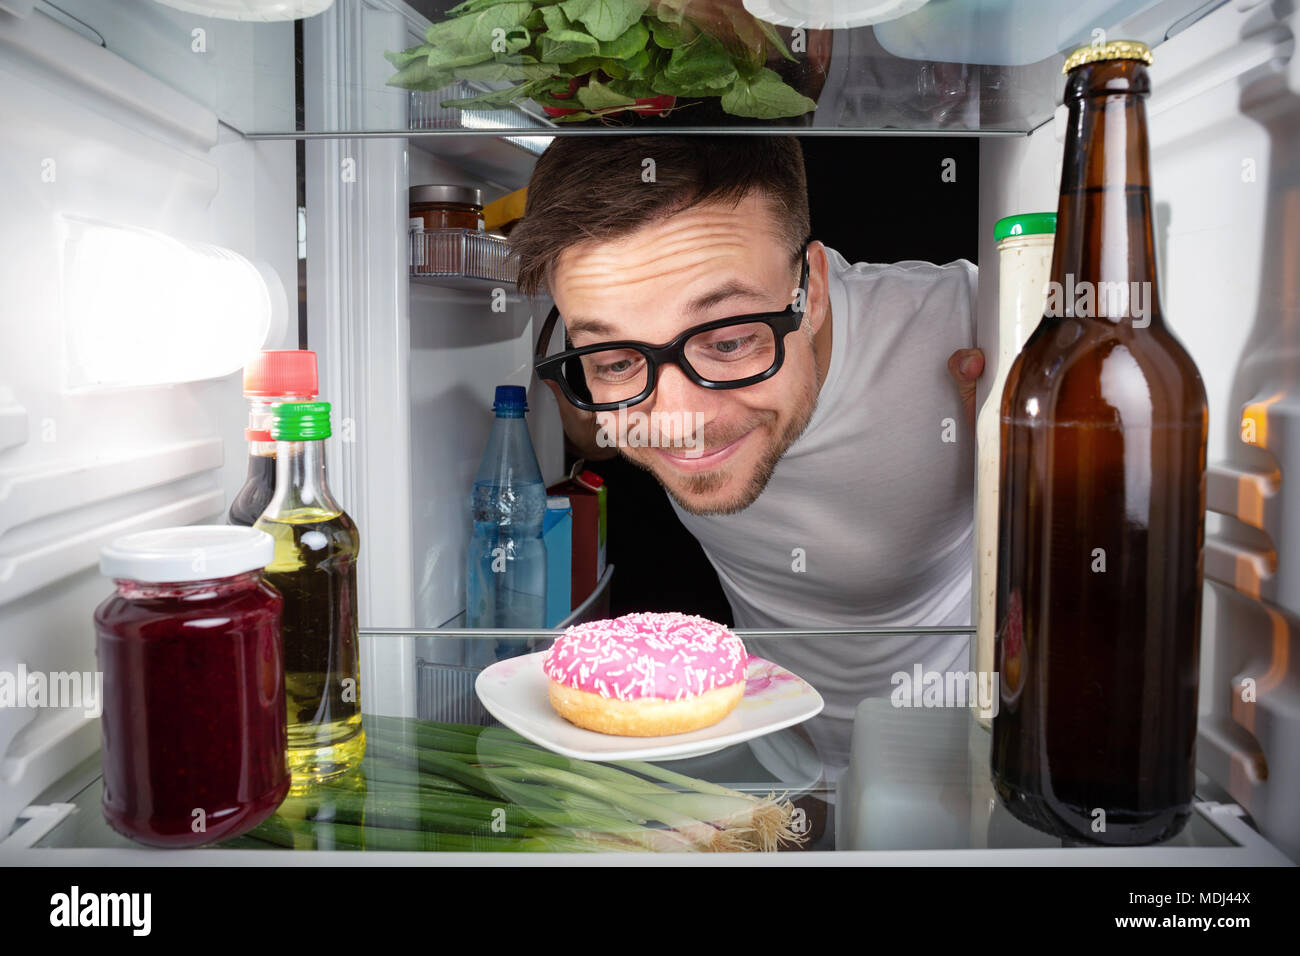 Nerd happy about a donut in the fridge Stock Photo